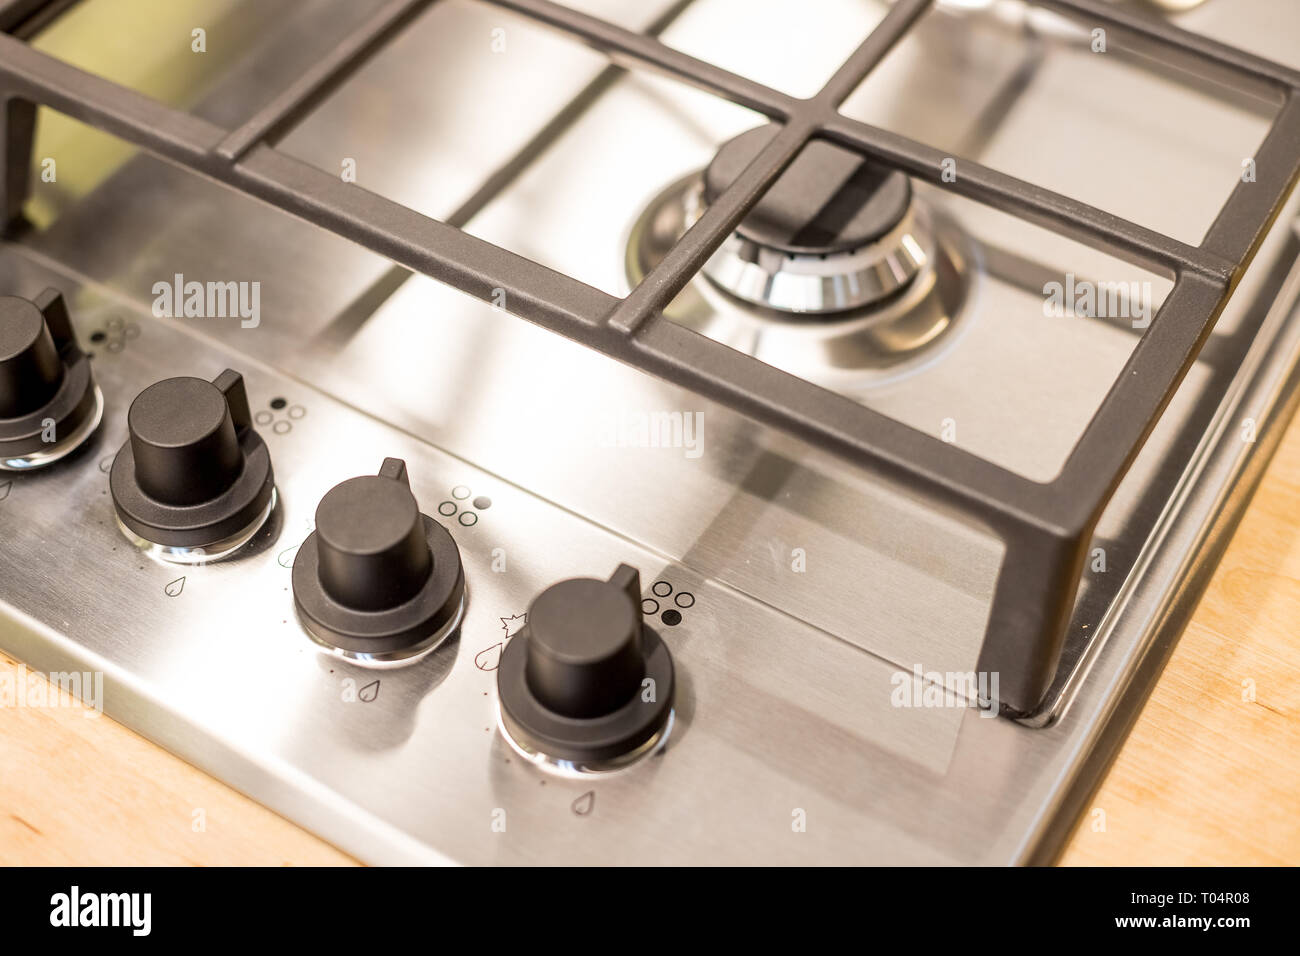 Metal gas stove on modern kitchen. the concept of forced savings on utilities Gas stove.knob heat switch ,elegant metal ,steel black and white.gas Stock Photo